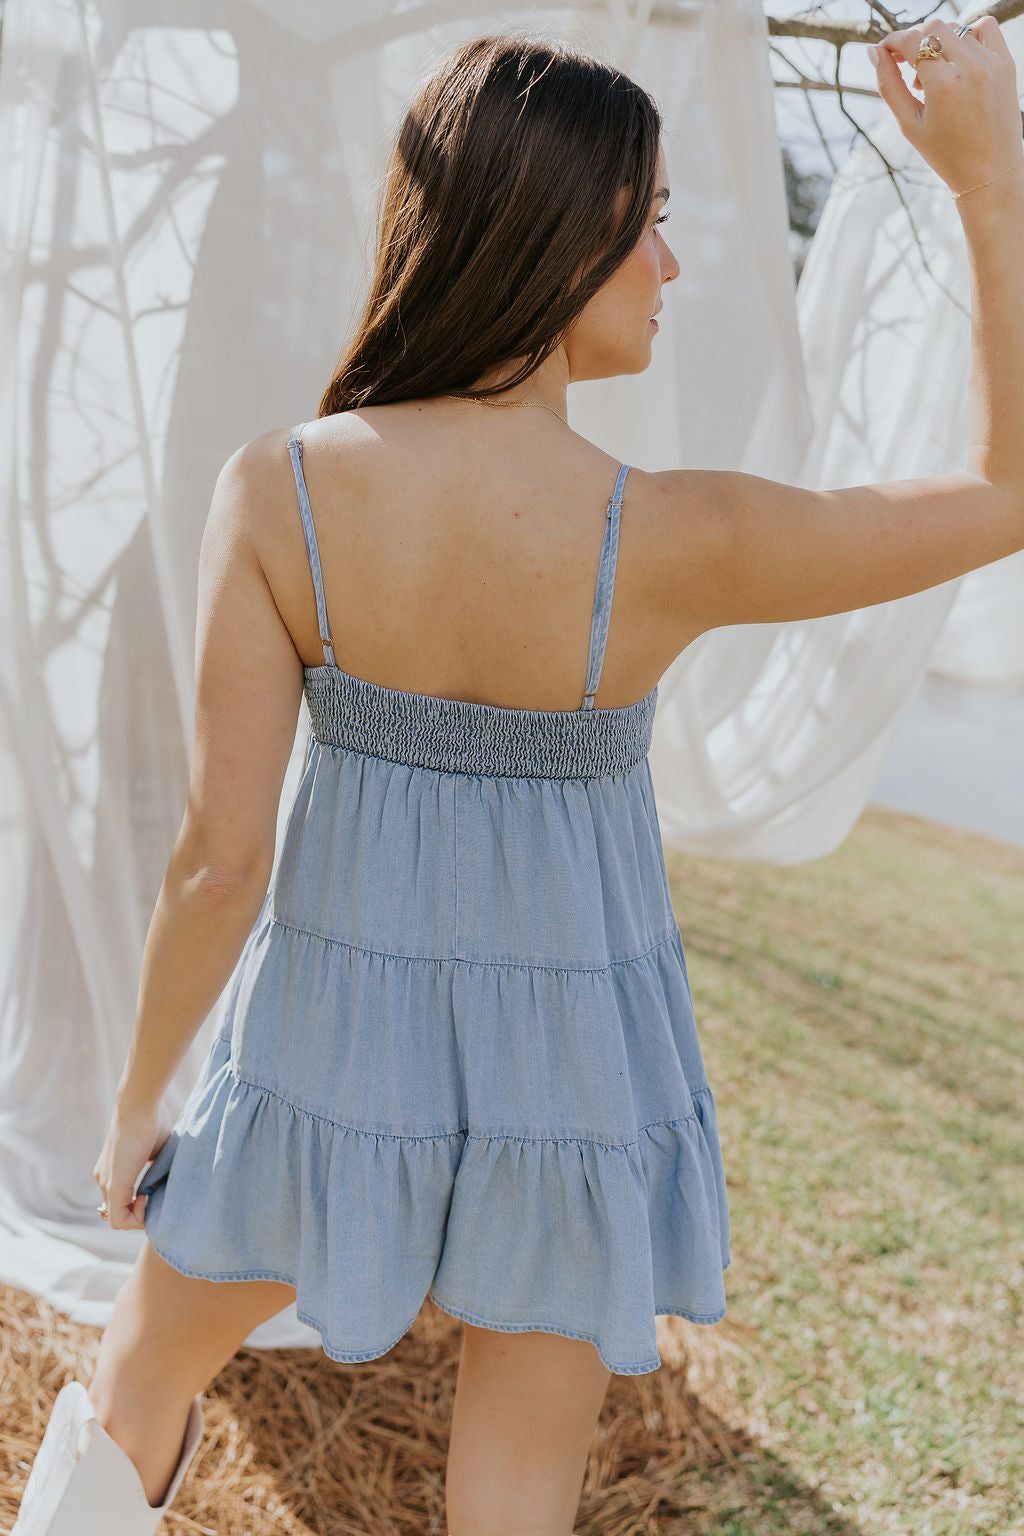 Back view of model wearing the Carla Chambray Sleeveless Mini Dress that has light blue fabric, tiered skirt, a smocked sweetheart neck and spaghetti straps. Worn with white boots.